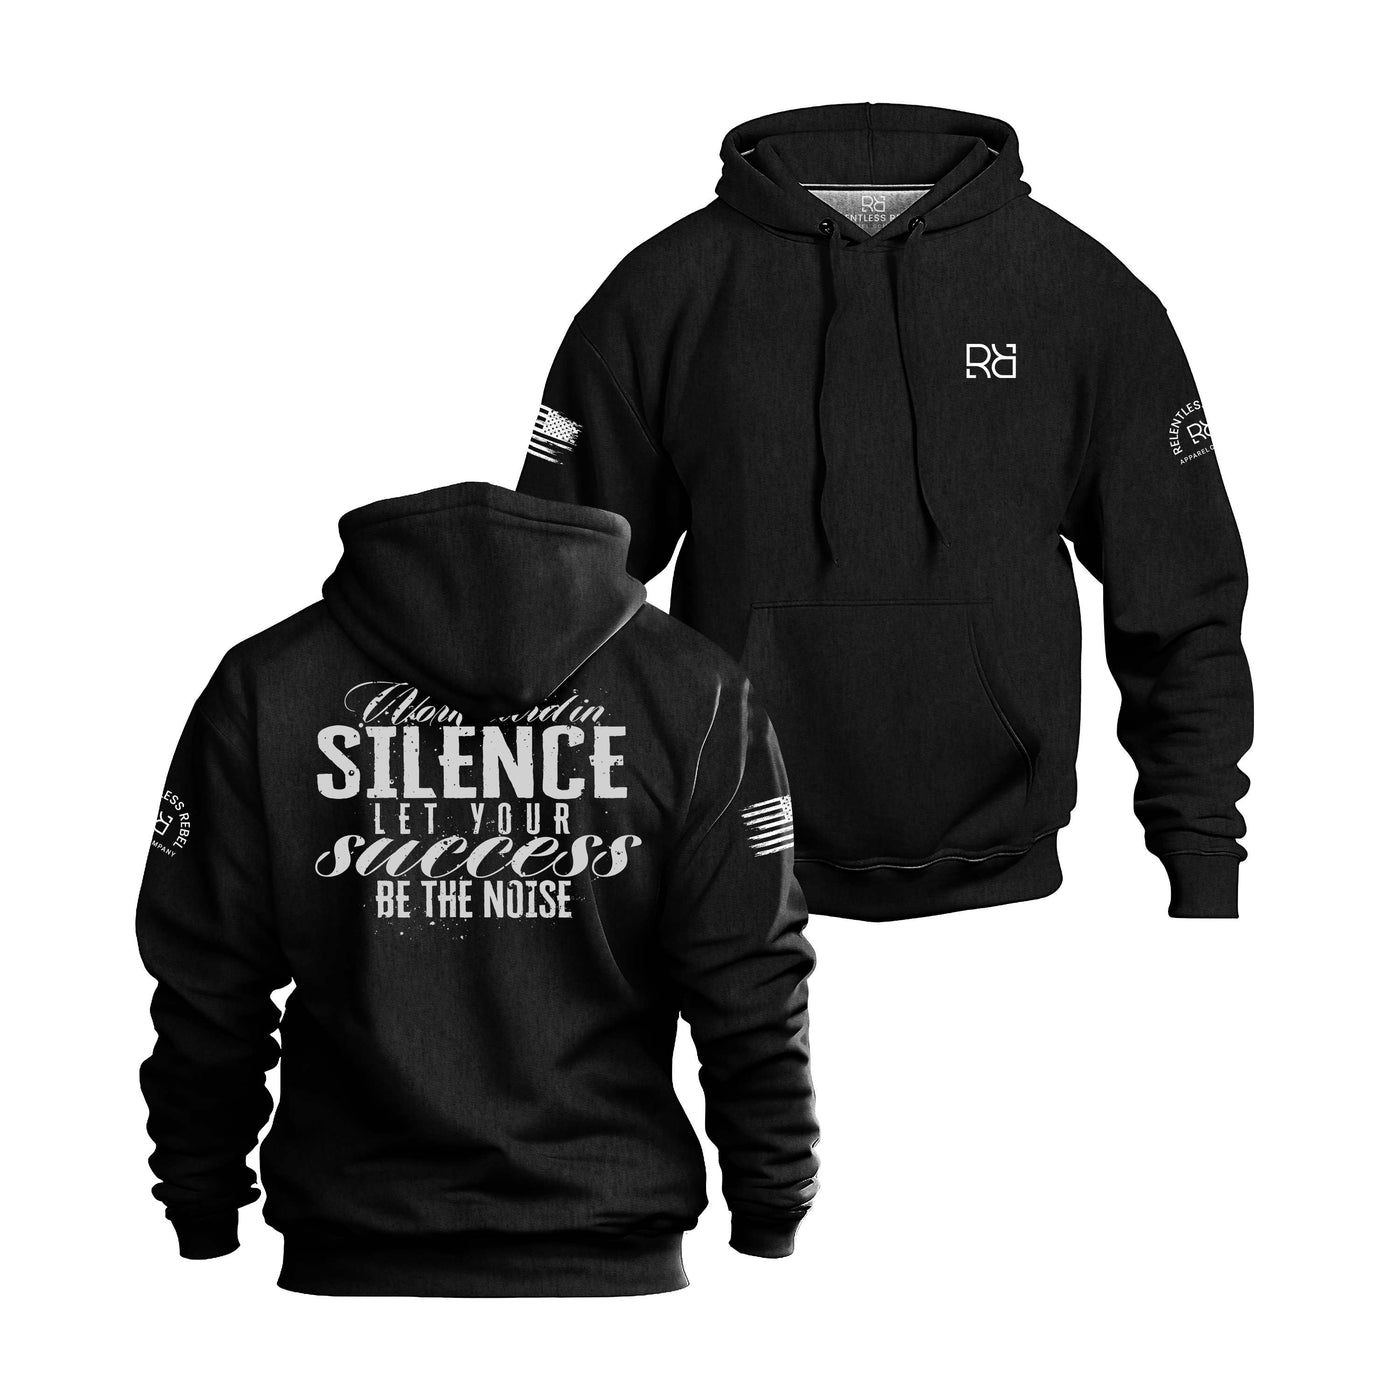 Work Hard In Silence - Let Success Be the Noise | Heavy Weight Men's Hoodie